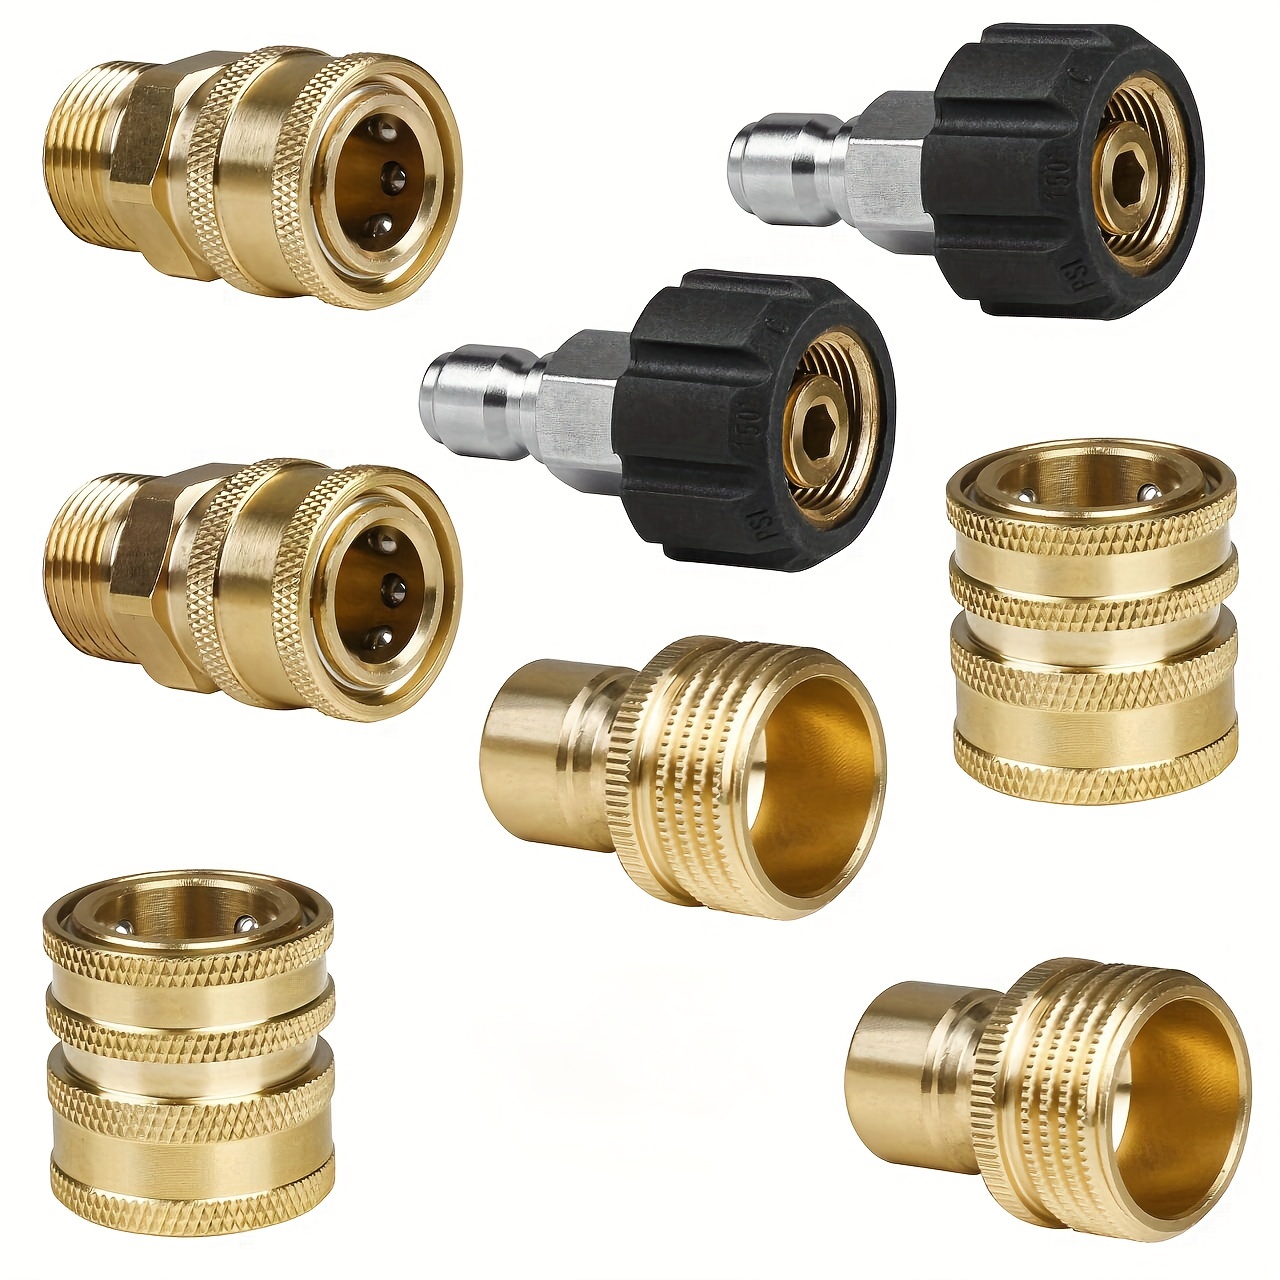 

8pcs High Pressure Washer Adapter Set, Quick Connect Kit With Metric M22 Female Swivel To 3/8'' Quick Connect, Male Fitting, 3/4" To Quick Release